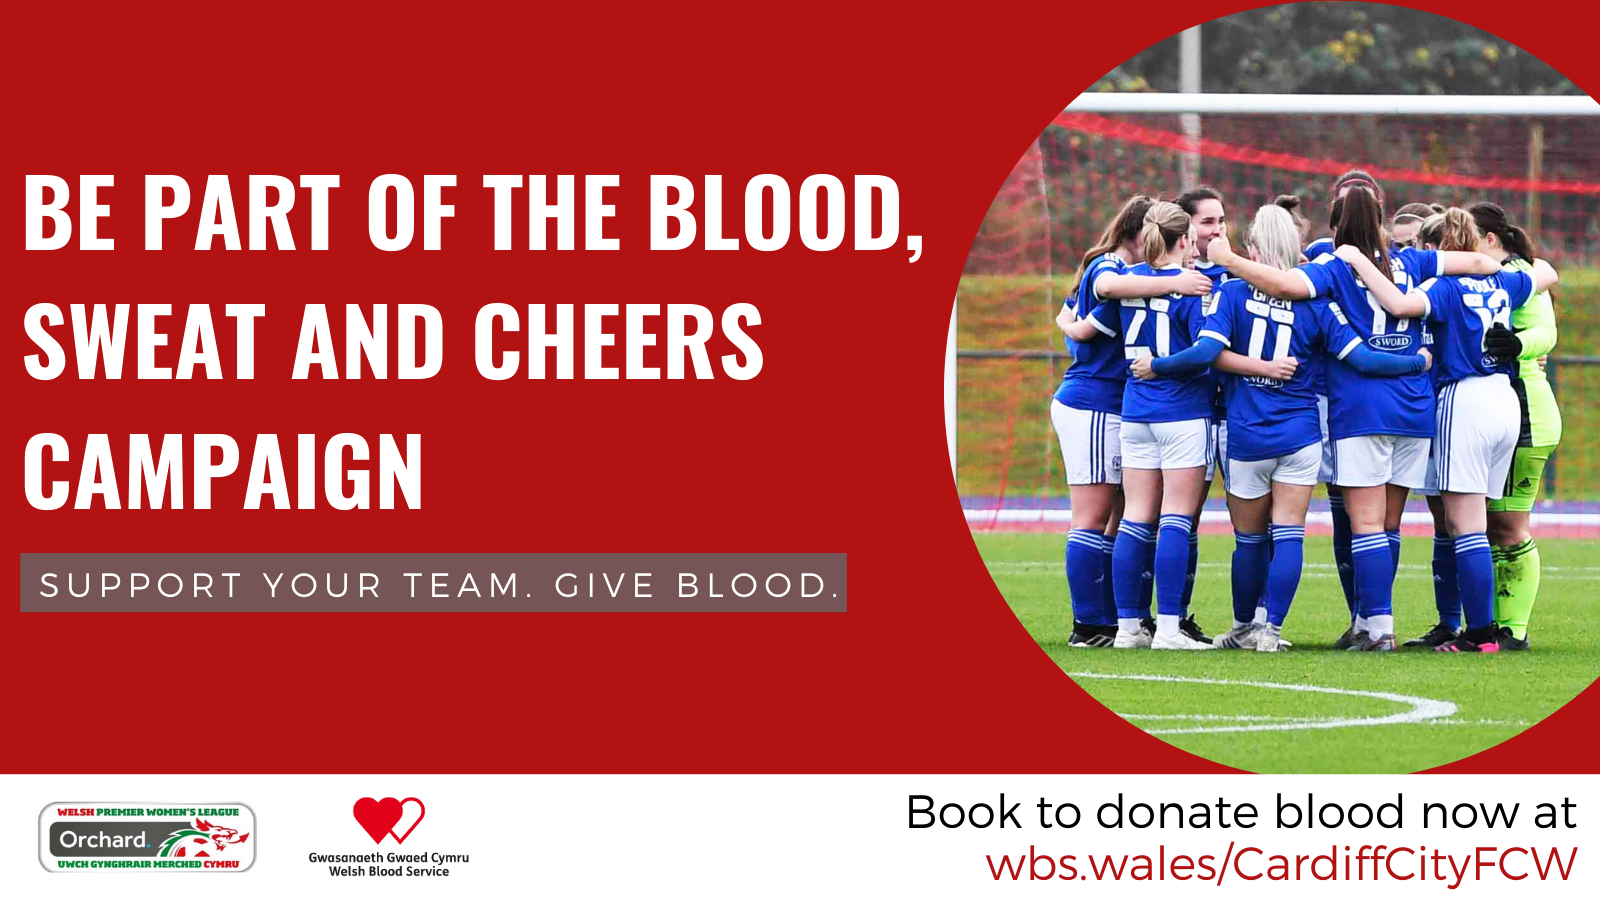 Be part of the Blood, Sweat and Cheers campaign...